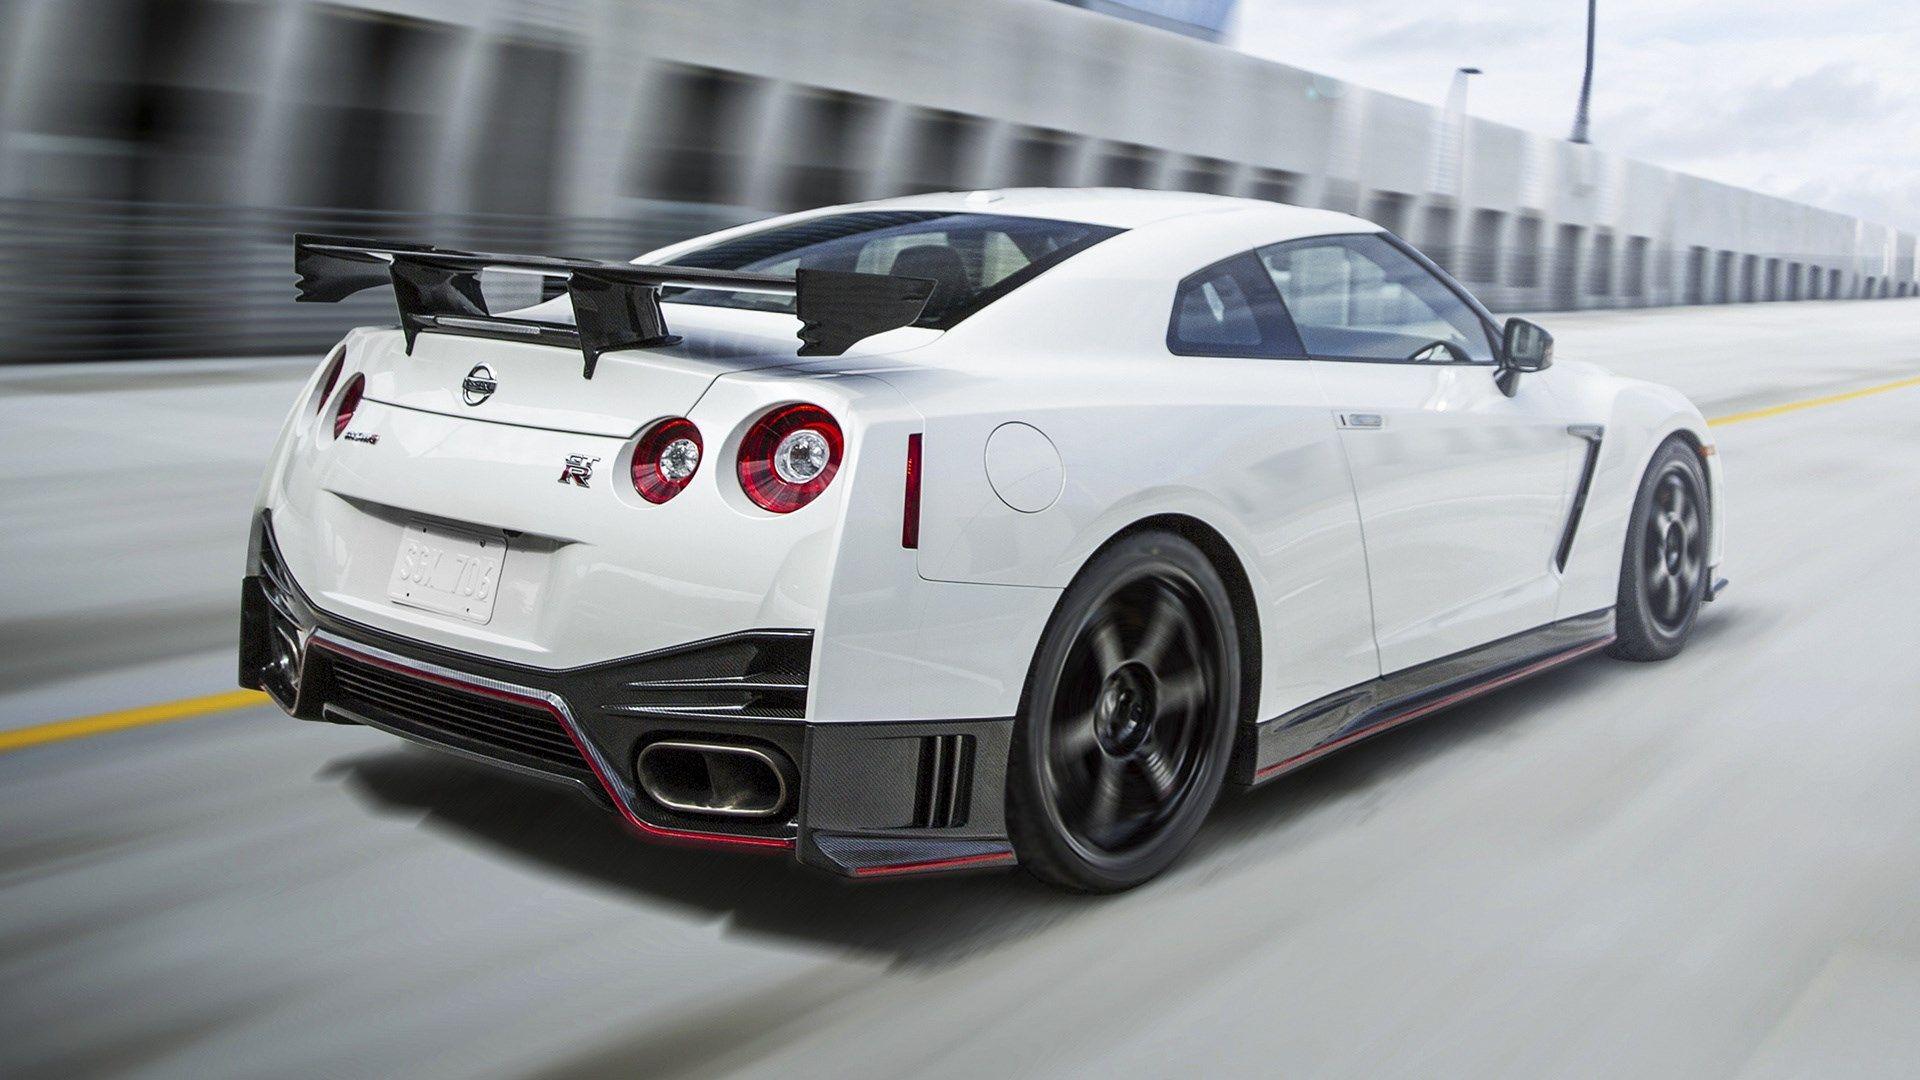 Nissan Gt R Hd Wallpapers Top Free Nissan Gt R Hd Backgrounds Wallpaperaccess